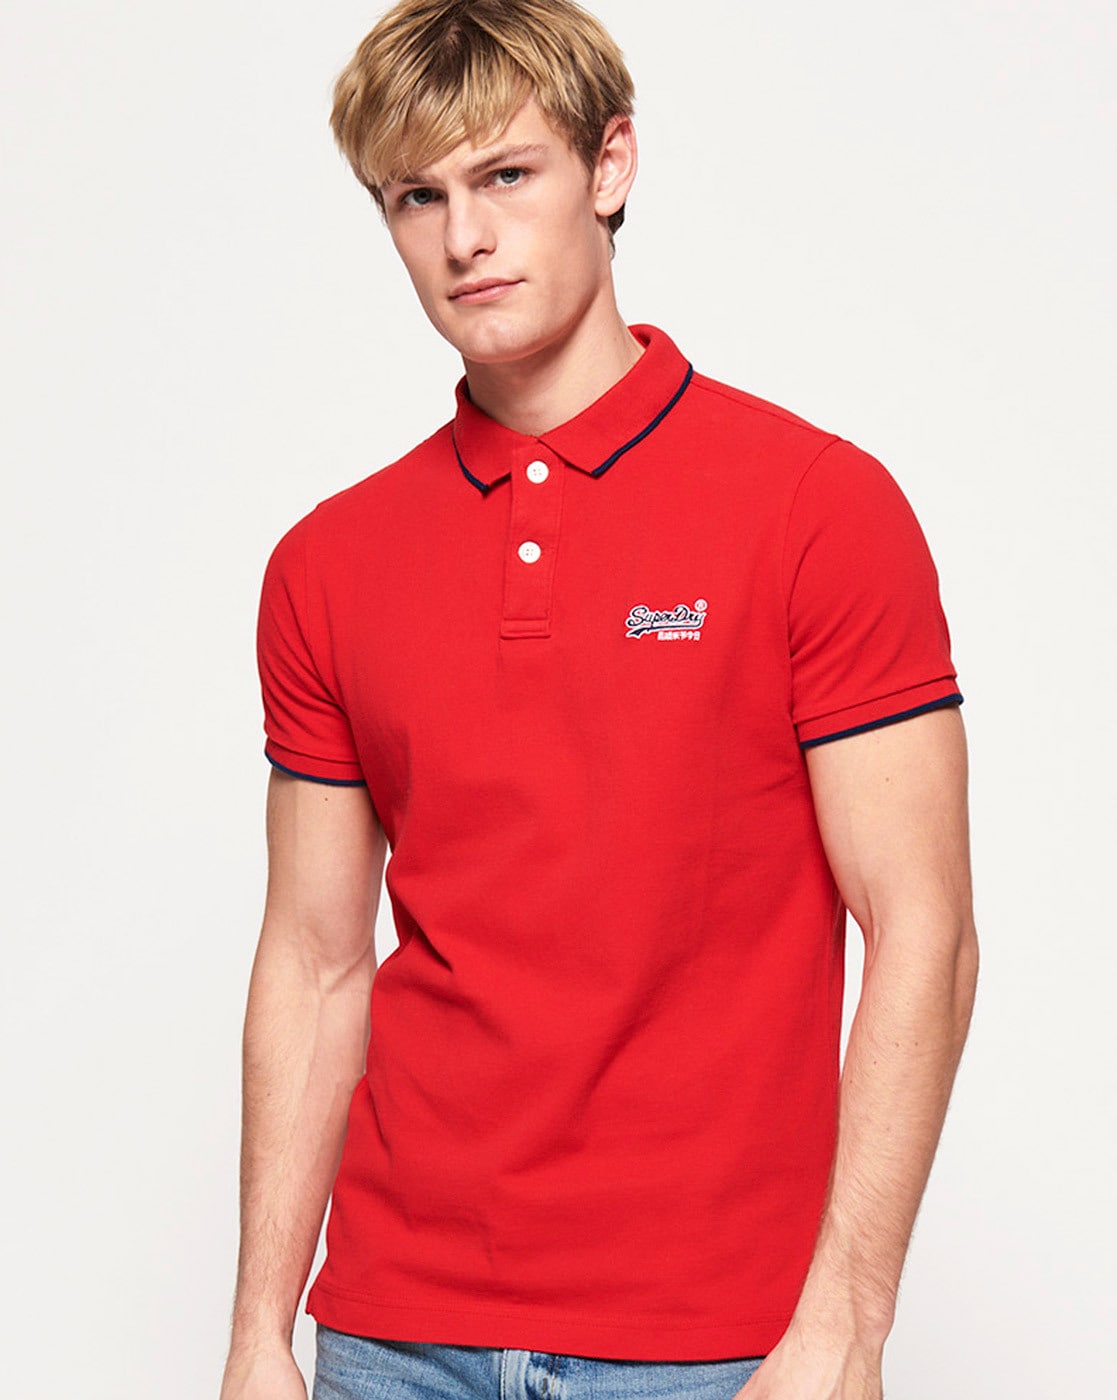 classic polo t shirts online